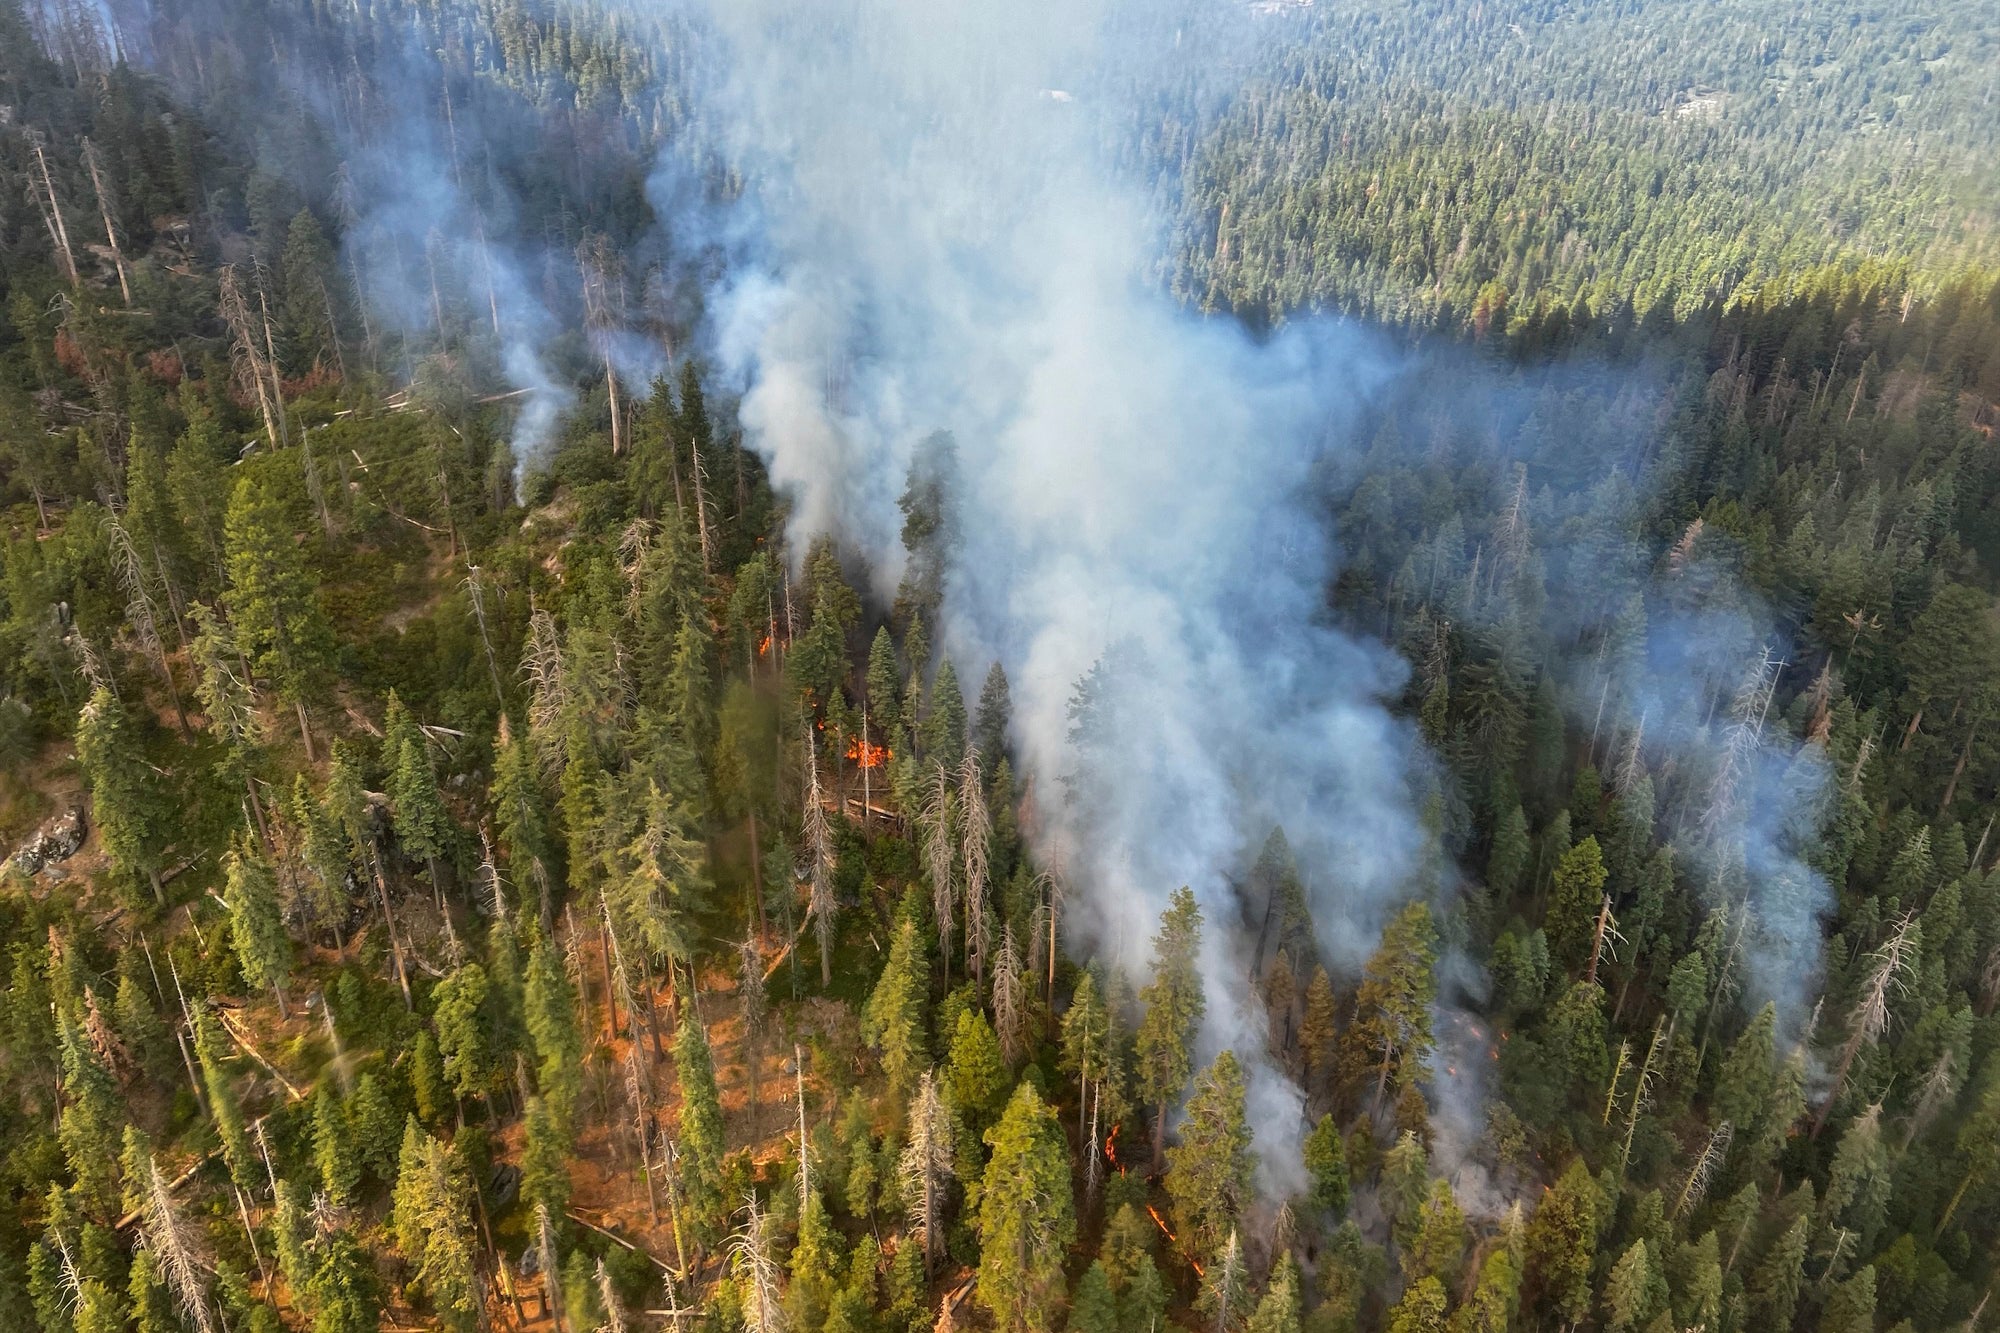 Part of Yosemite National Park has been closed as a wildfire quintupled in size near a grove of California's famous giant sequoia trees, officials said. Photo from Friday, July 8. (Photo: National Park Service, AP)